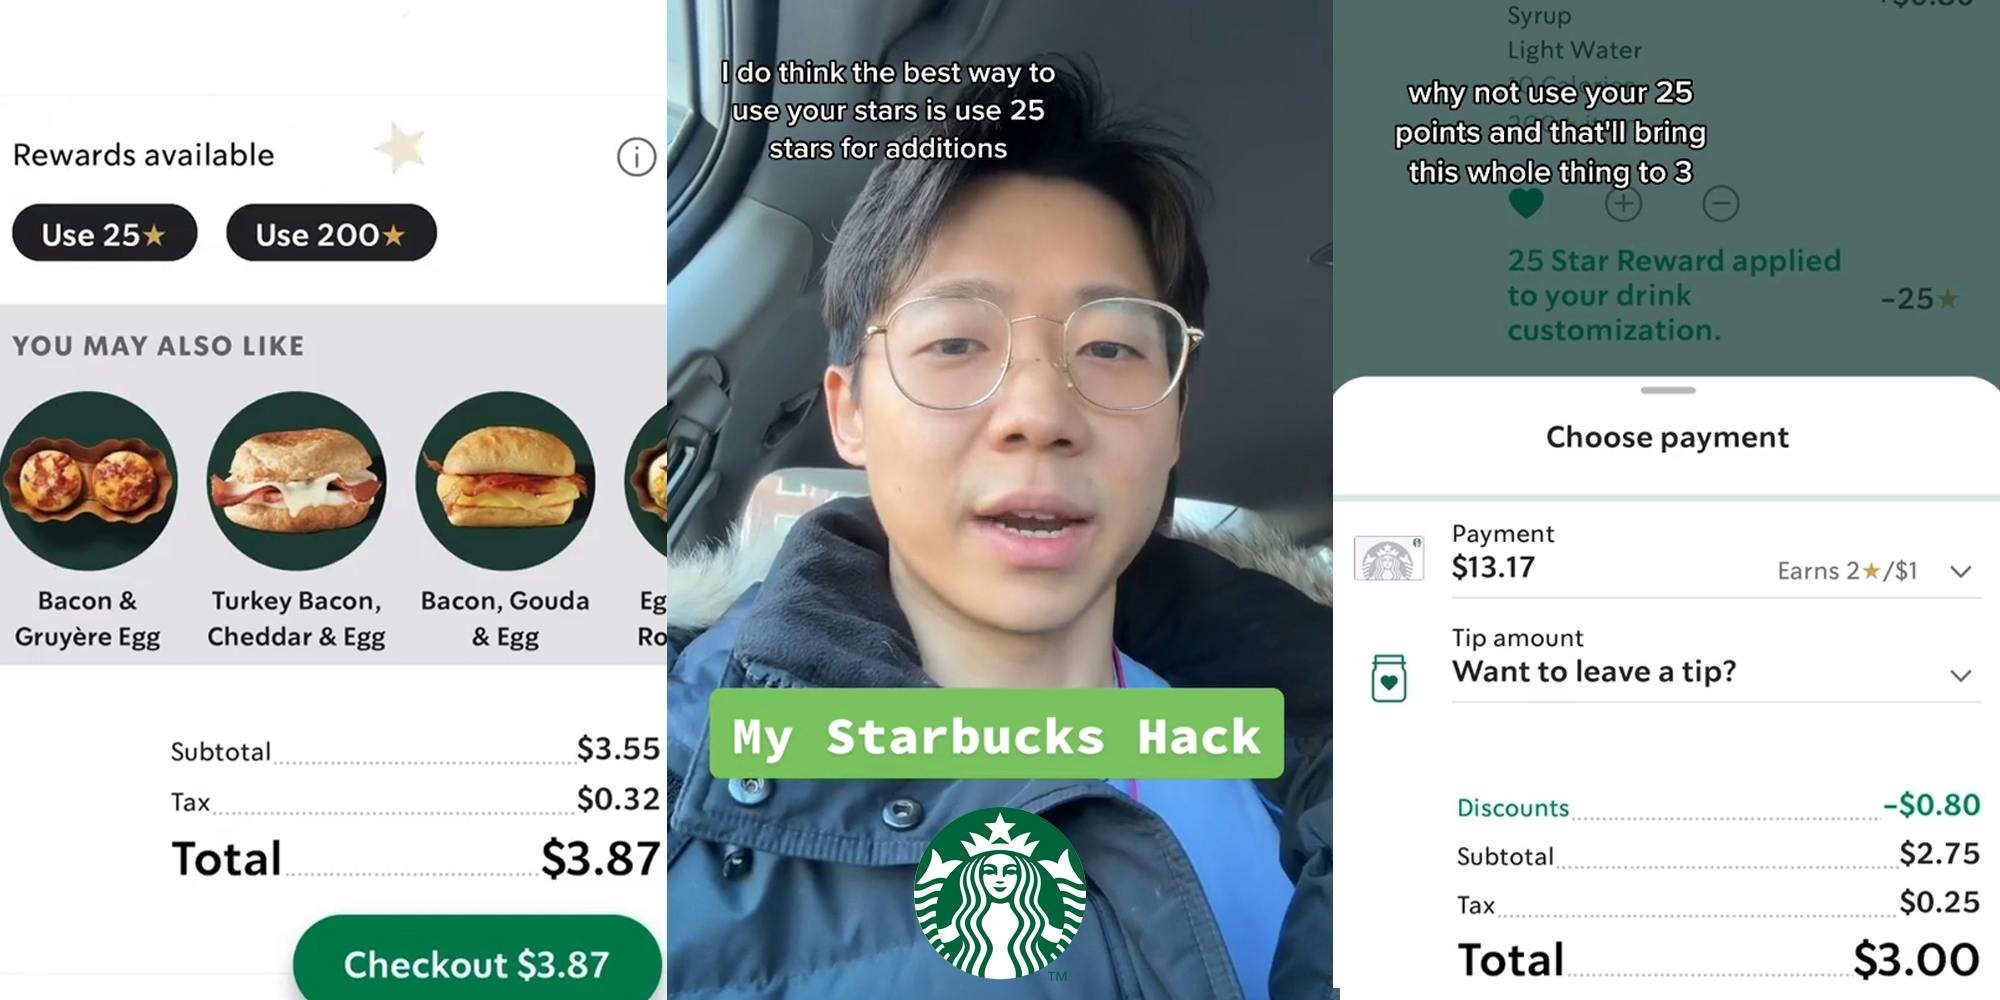 Starbucks app with total at $3.87 (l) man speaking in car with caption "I do think the best way ro use your stars is use 25 stars for additions My Starbucks Hack" and Starbucks logo at bottom (c) Starbucks app with total at $3.00 with caption "why not use your 25 points and that'll bring this whole thing to 3" (r)